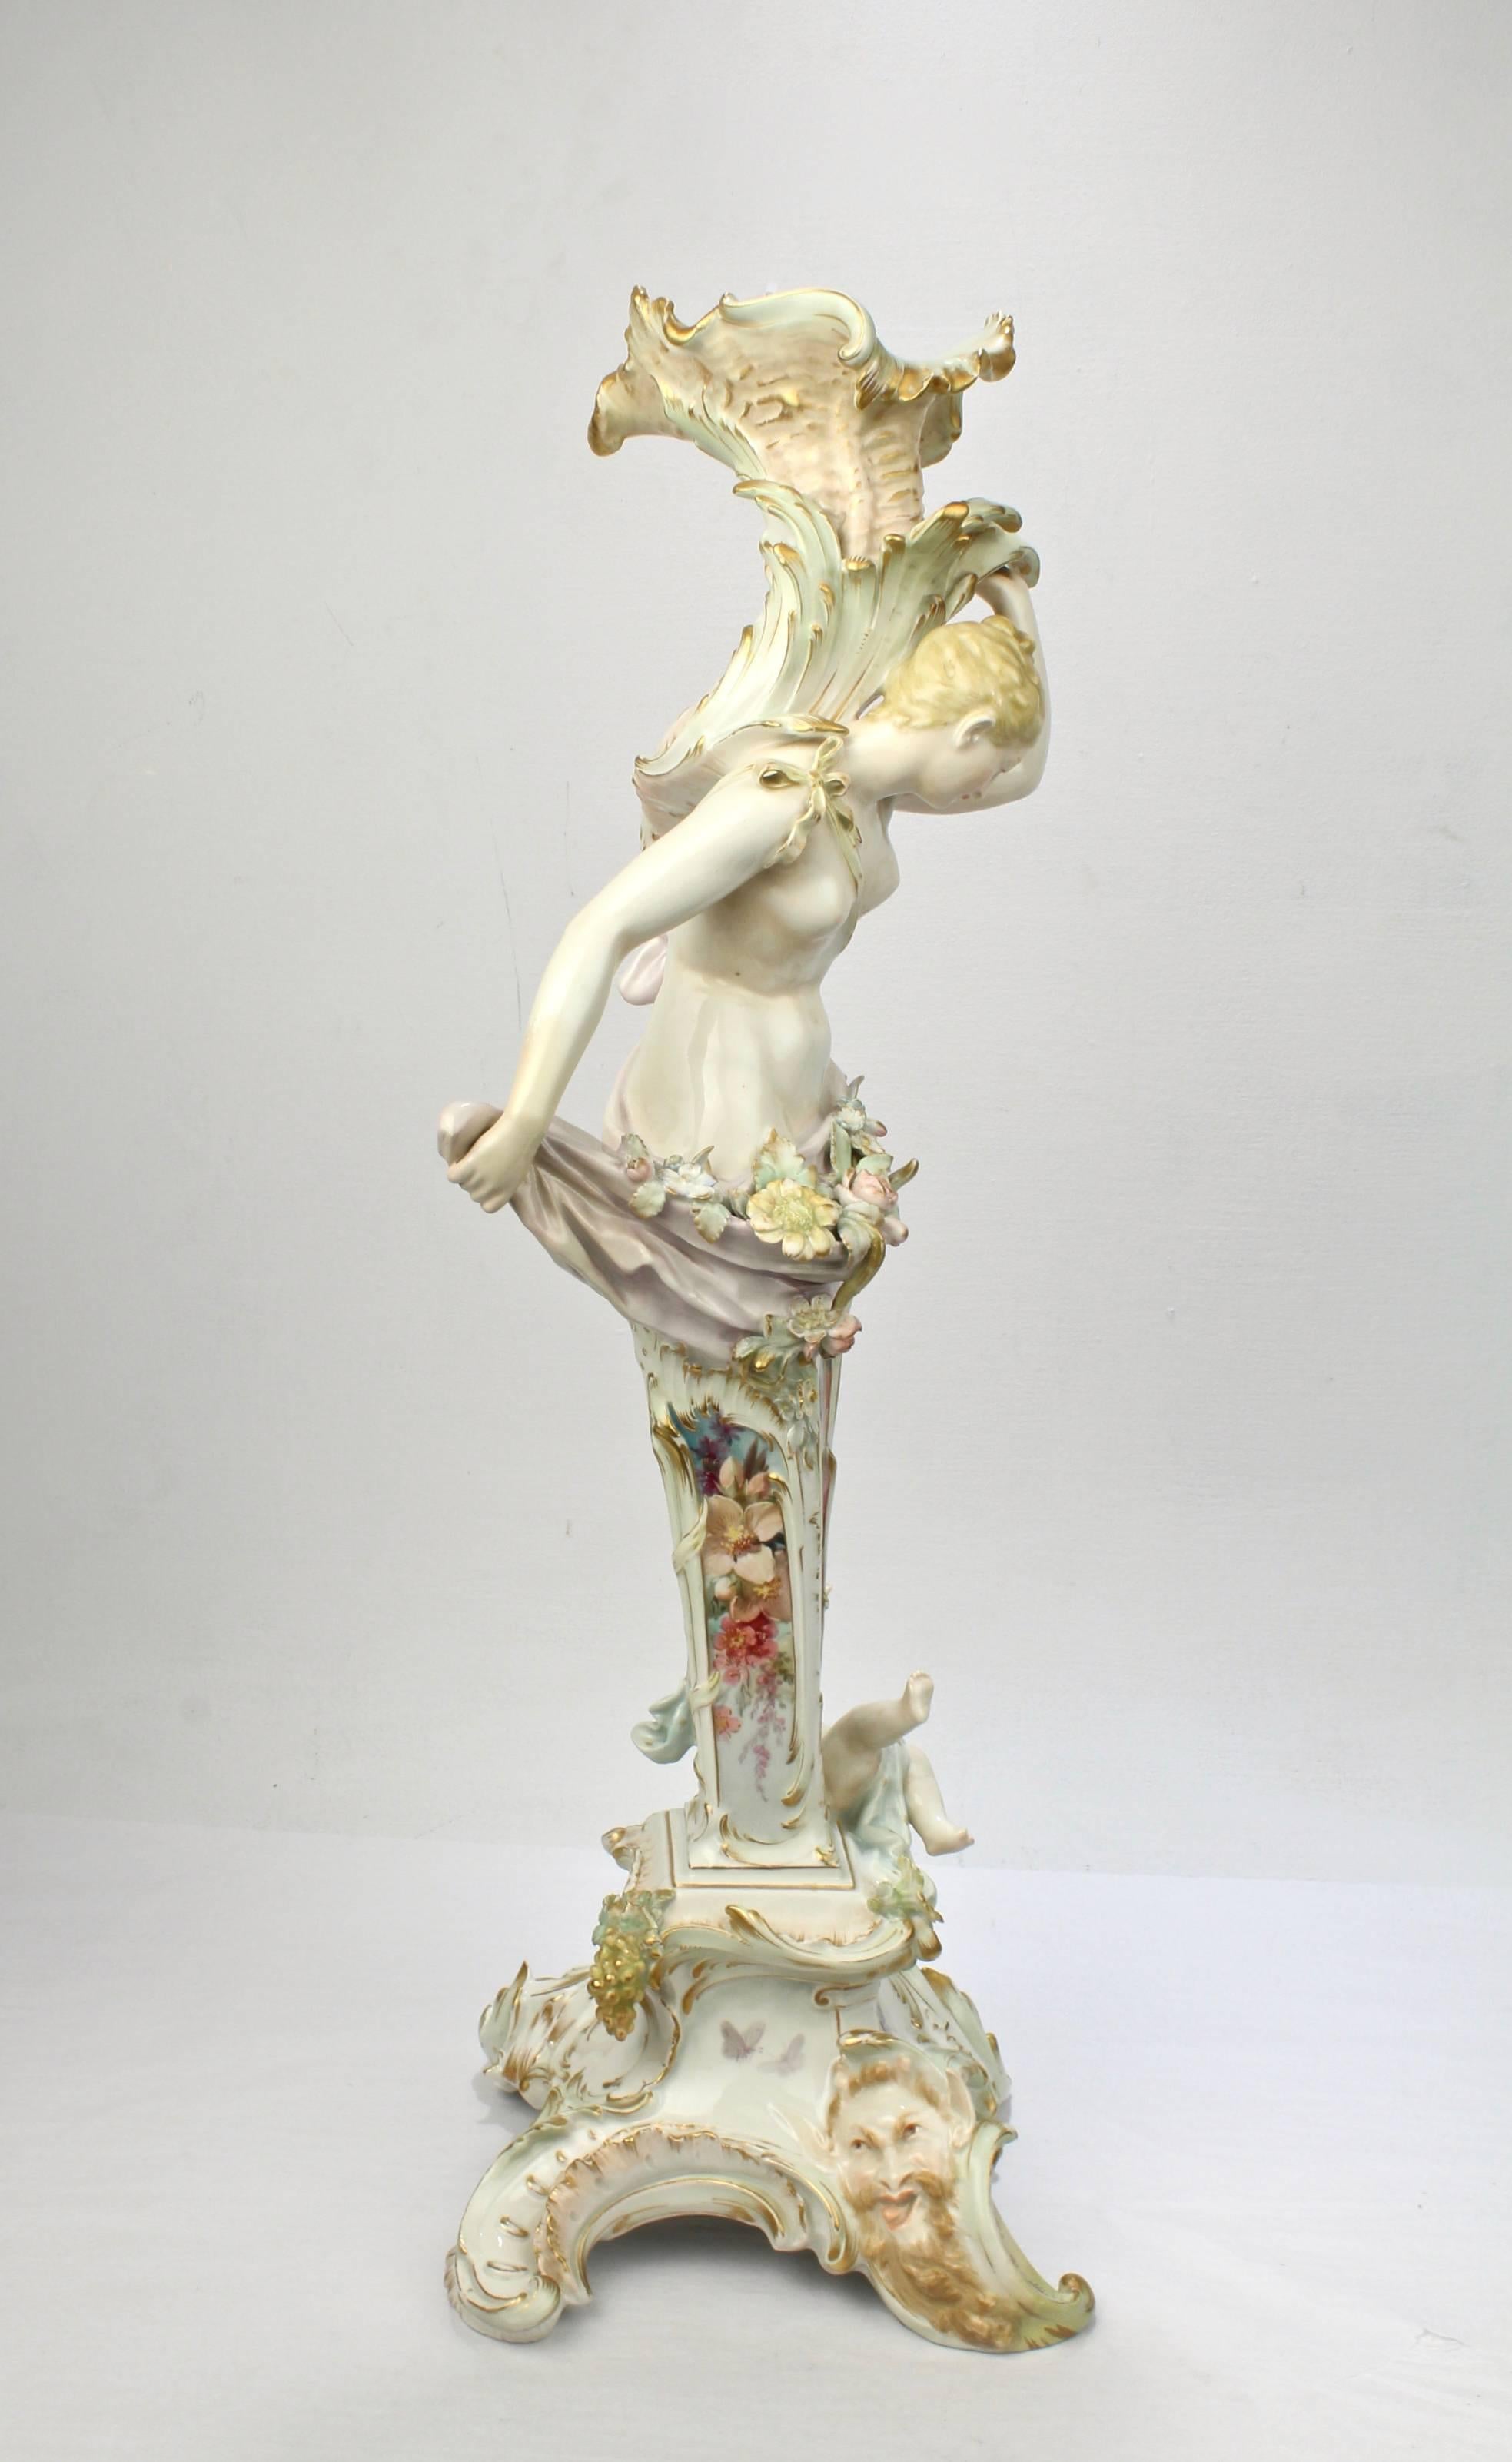 An extremely rare, figural KPM porcelain candlestick or candelabrum base with Weichmalerei decoration. 

A tour de force in technical and decorative achievements.

Designed by Paul Schley for the KPM Royal Berlin Porcelain Manufactory in 1886,